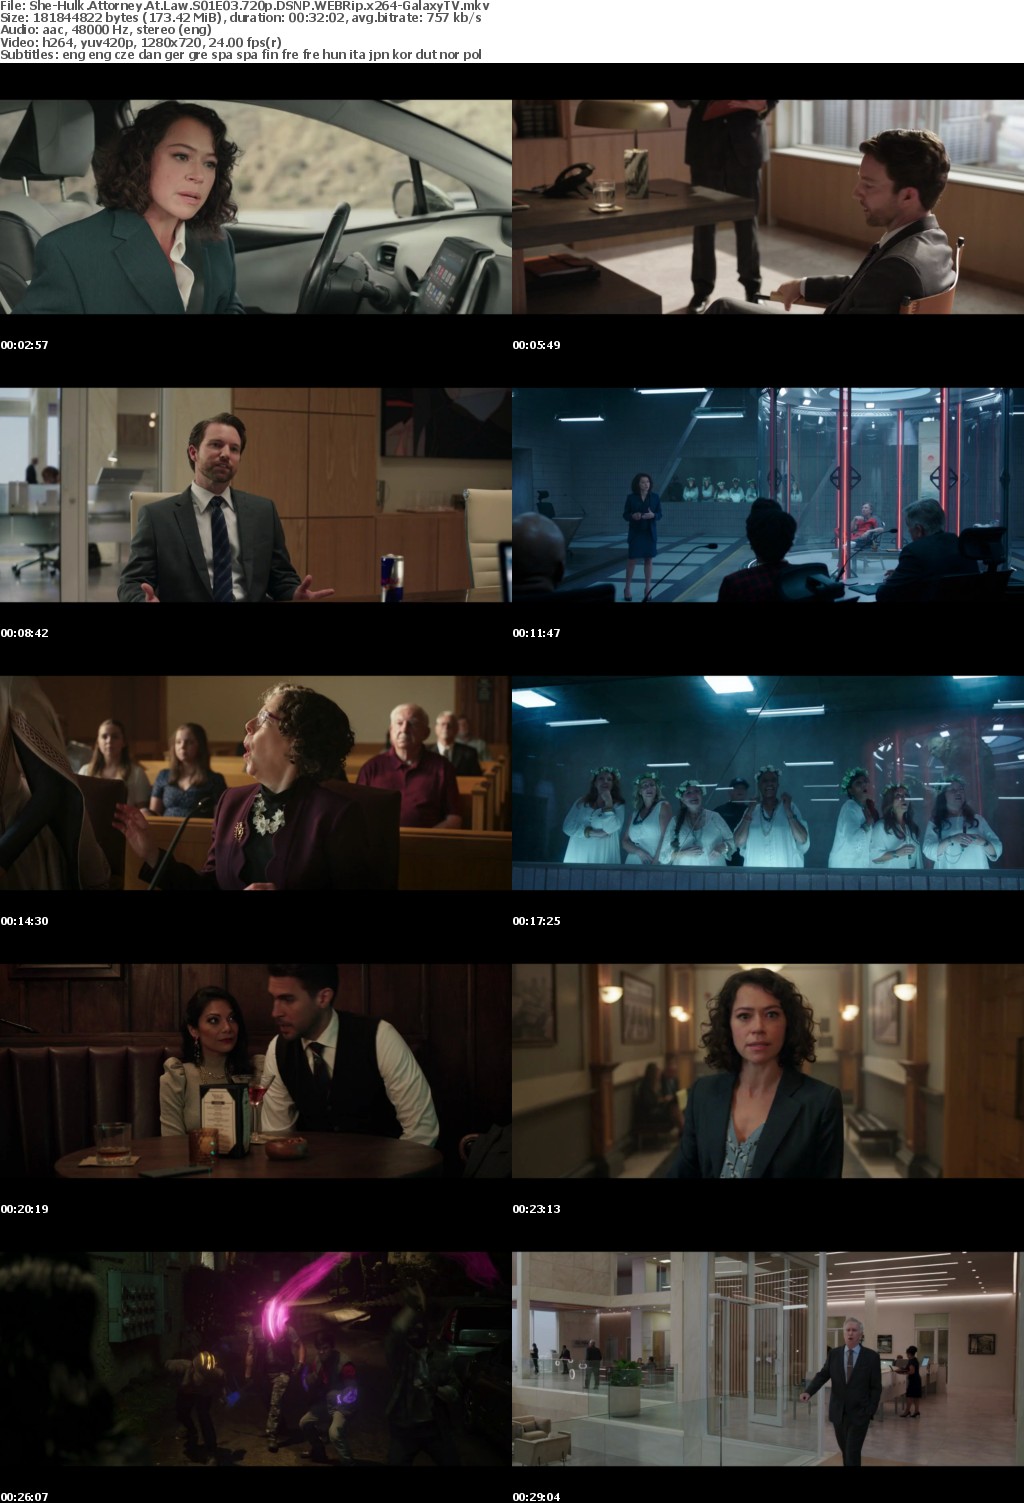 She-Hulk Attorney at Law S01 COMPLETE 720p DSNP WEBRip x264-GalaxyTV